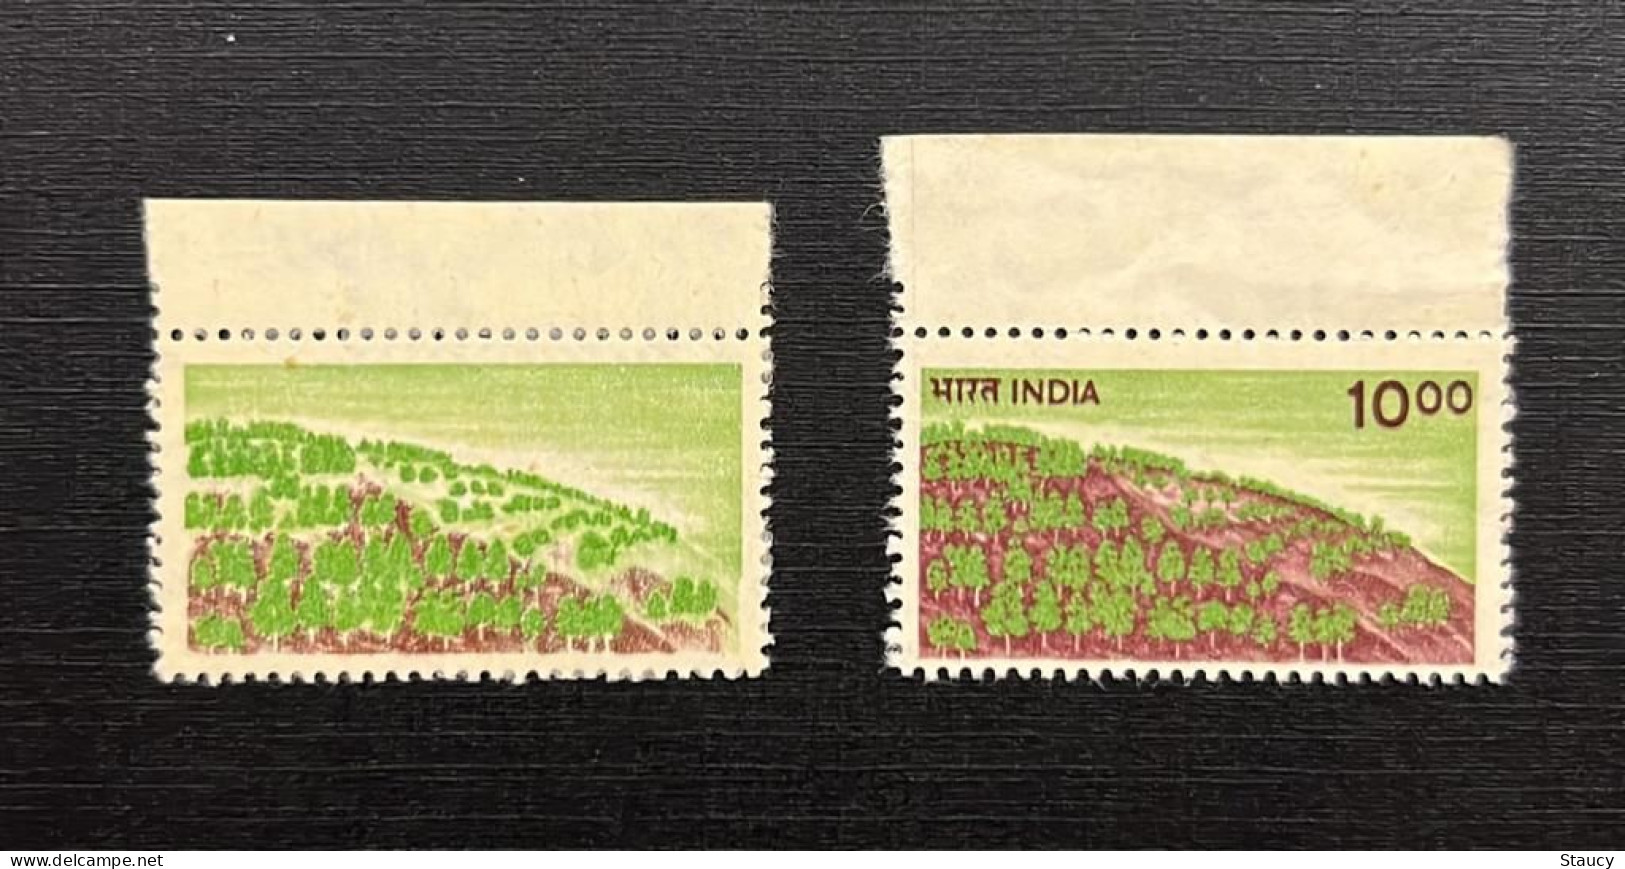 India 1988 Error 6th Definitive Series, Rs.10  Afforestation / Tree Error "partly BROWN COLOUR OMMITTED" MNH As Per Scan - Fehldrucke